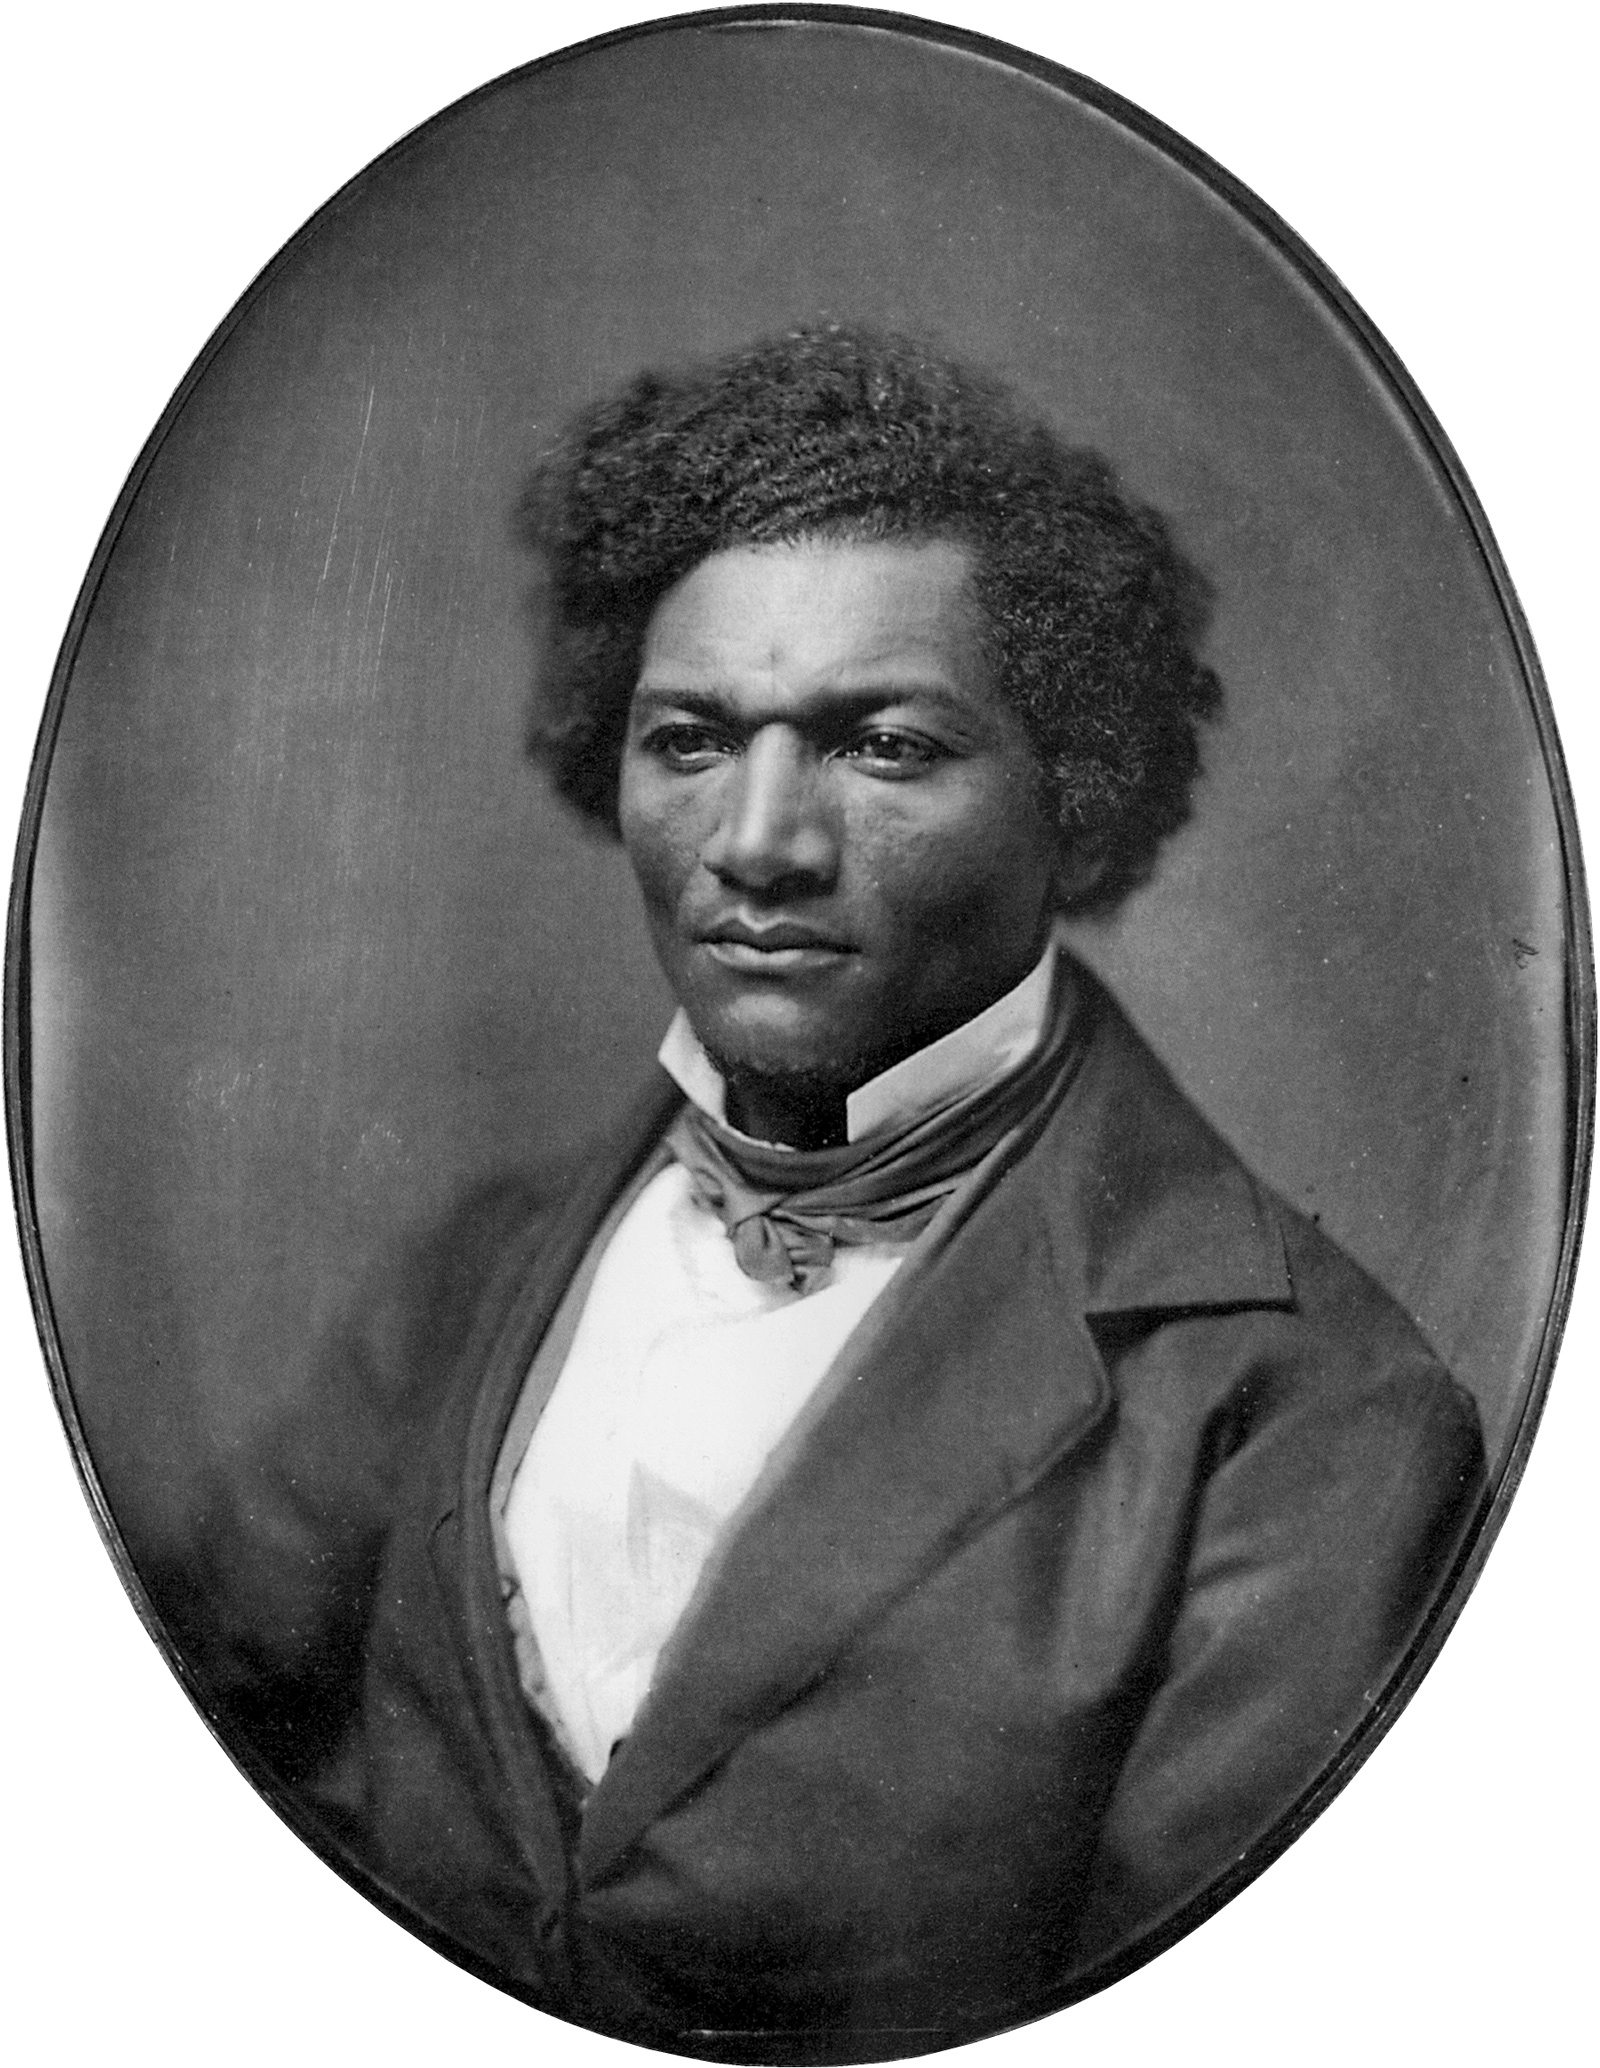 Frederick Douglass, Syracuse, New York, July–August 1843; whole-plate daguerreotype by an unknown photographer, from Picturing Frederick Douglass